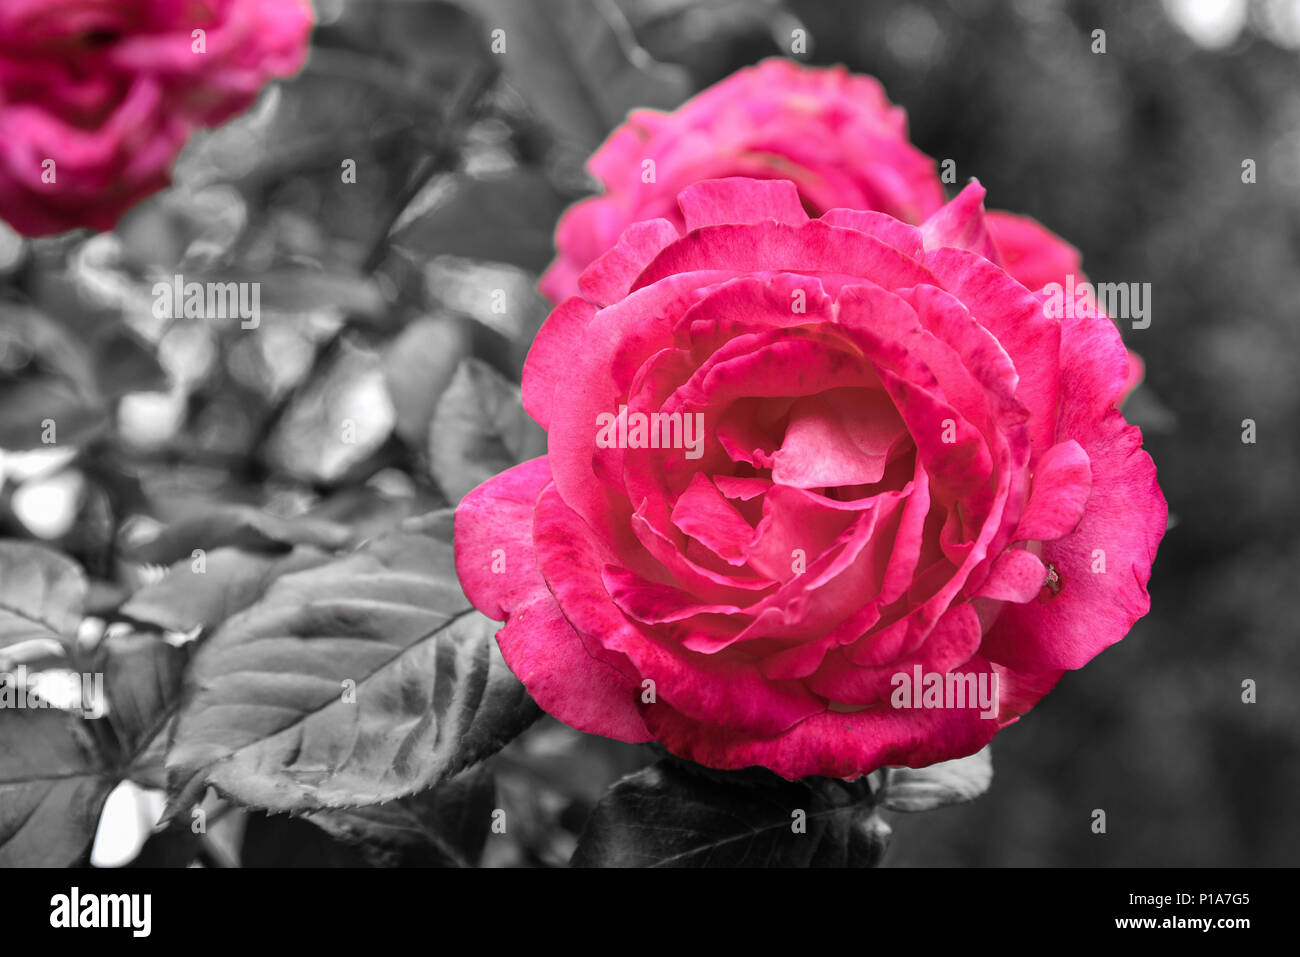 a pink rose on a recoloured black and white background Stock Photo